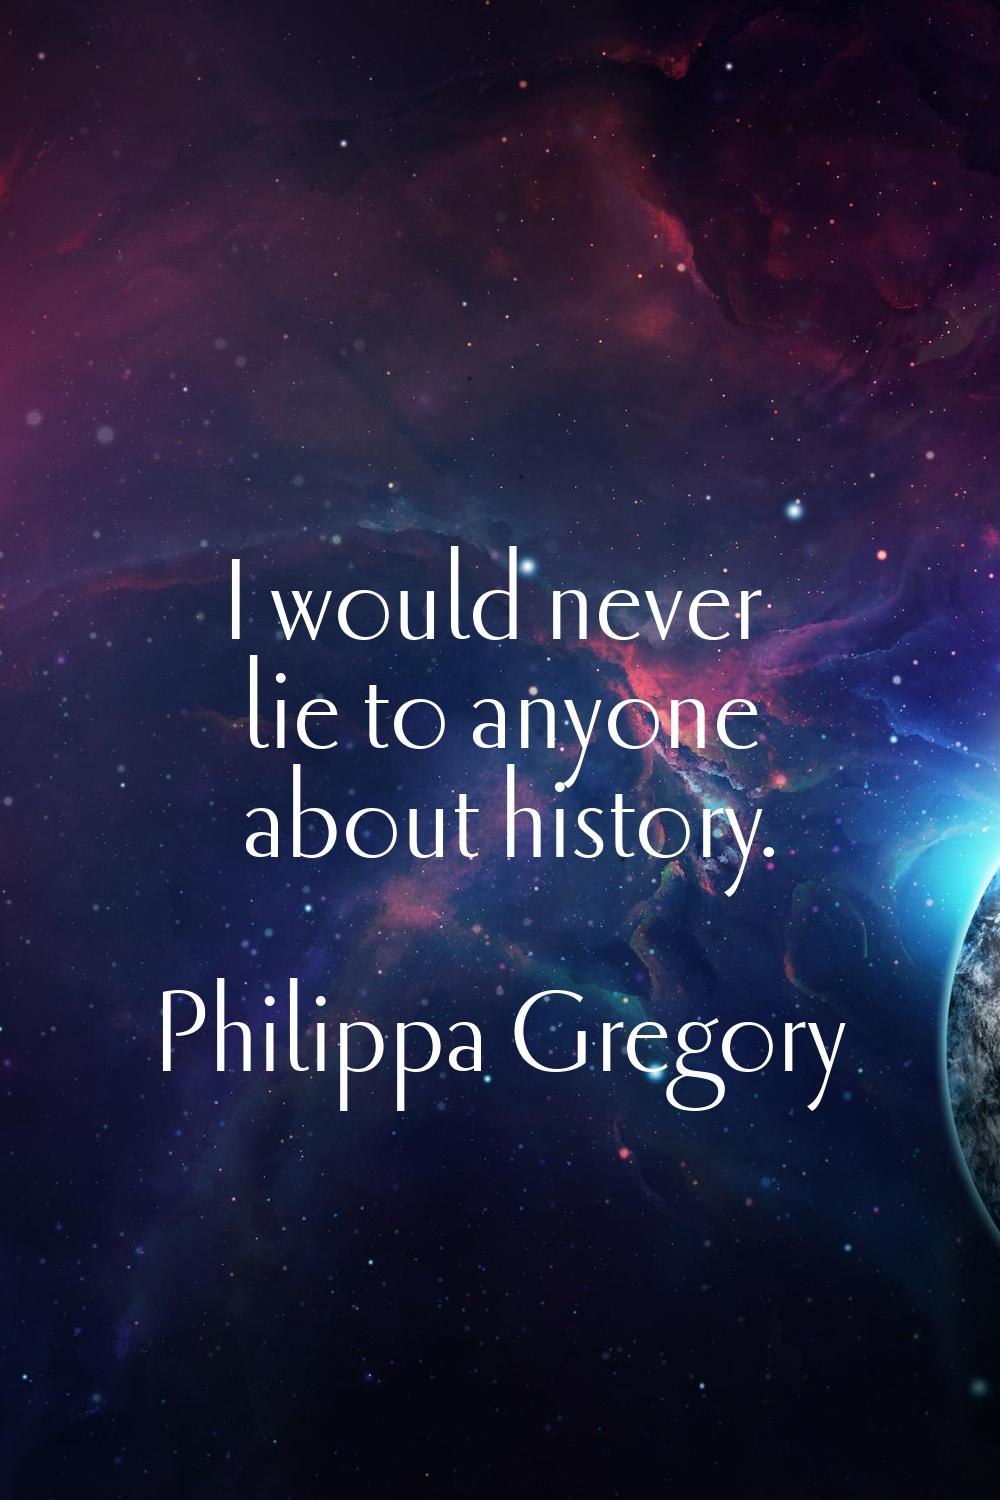 I would never lie to anyone about history.